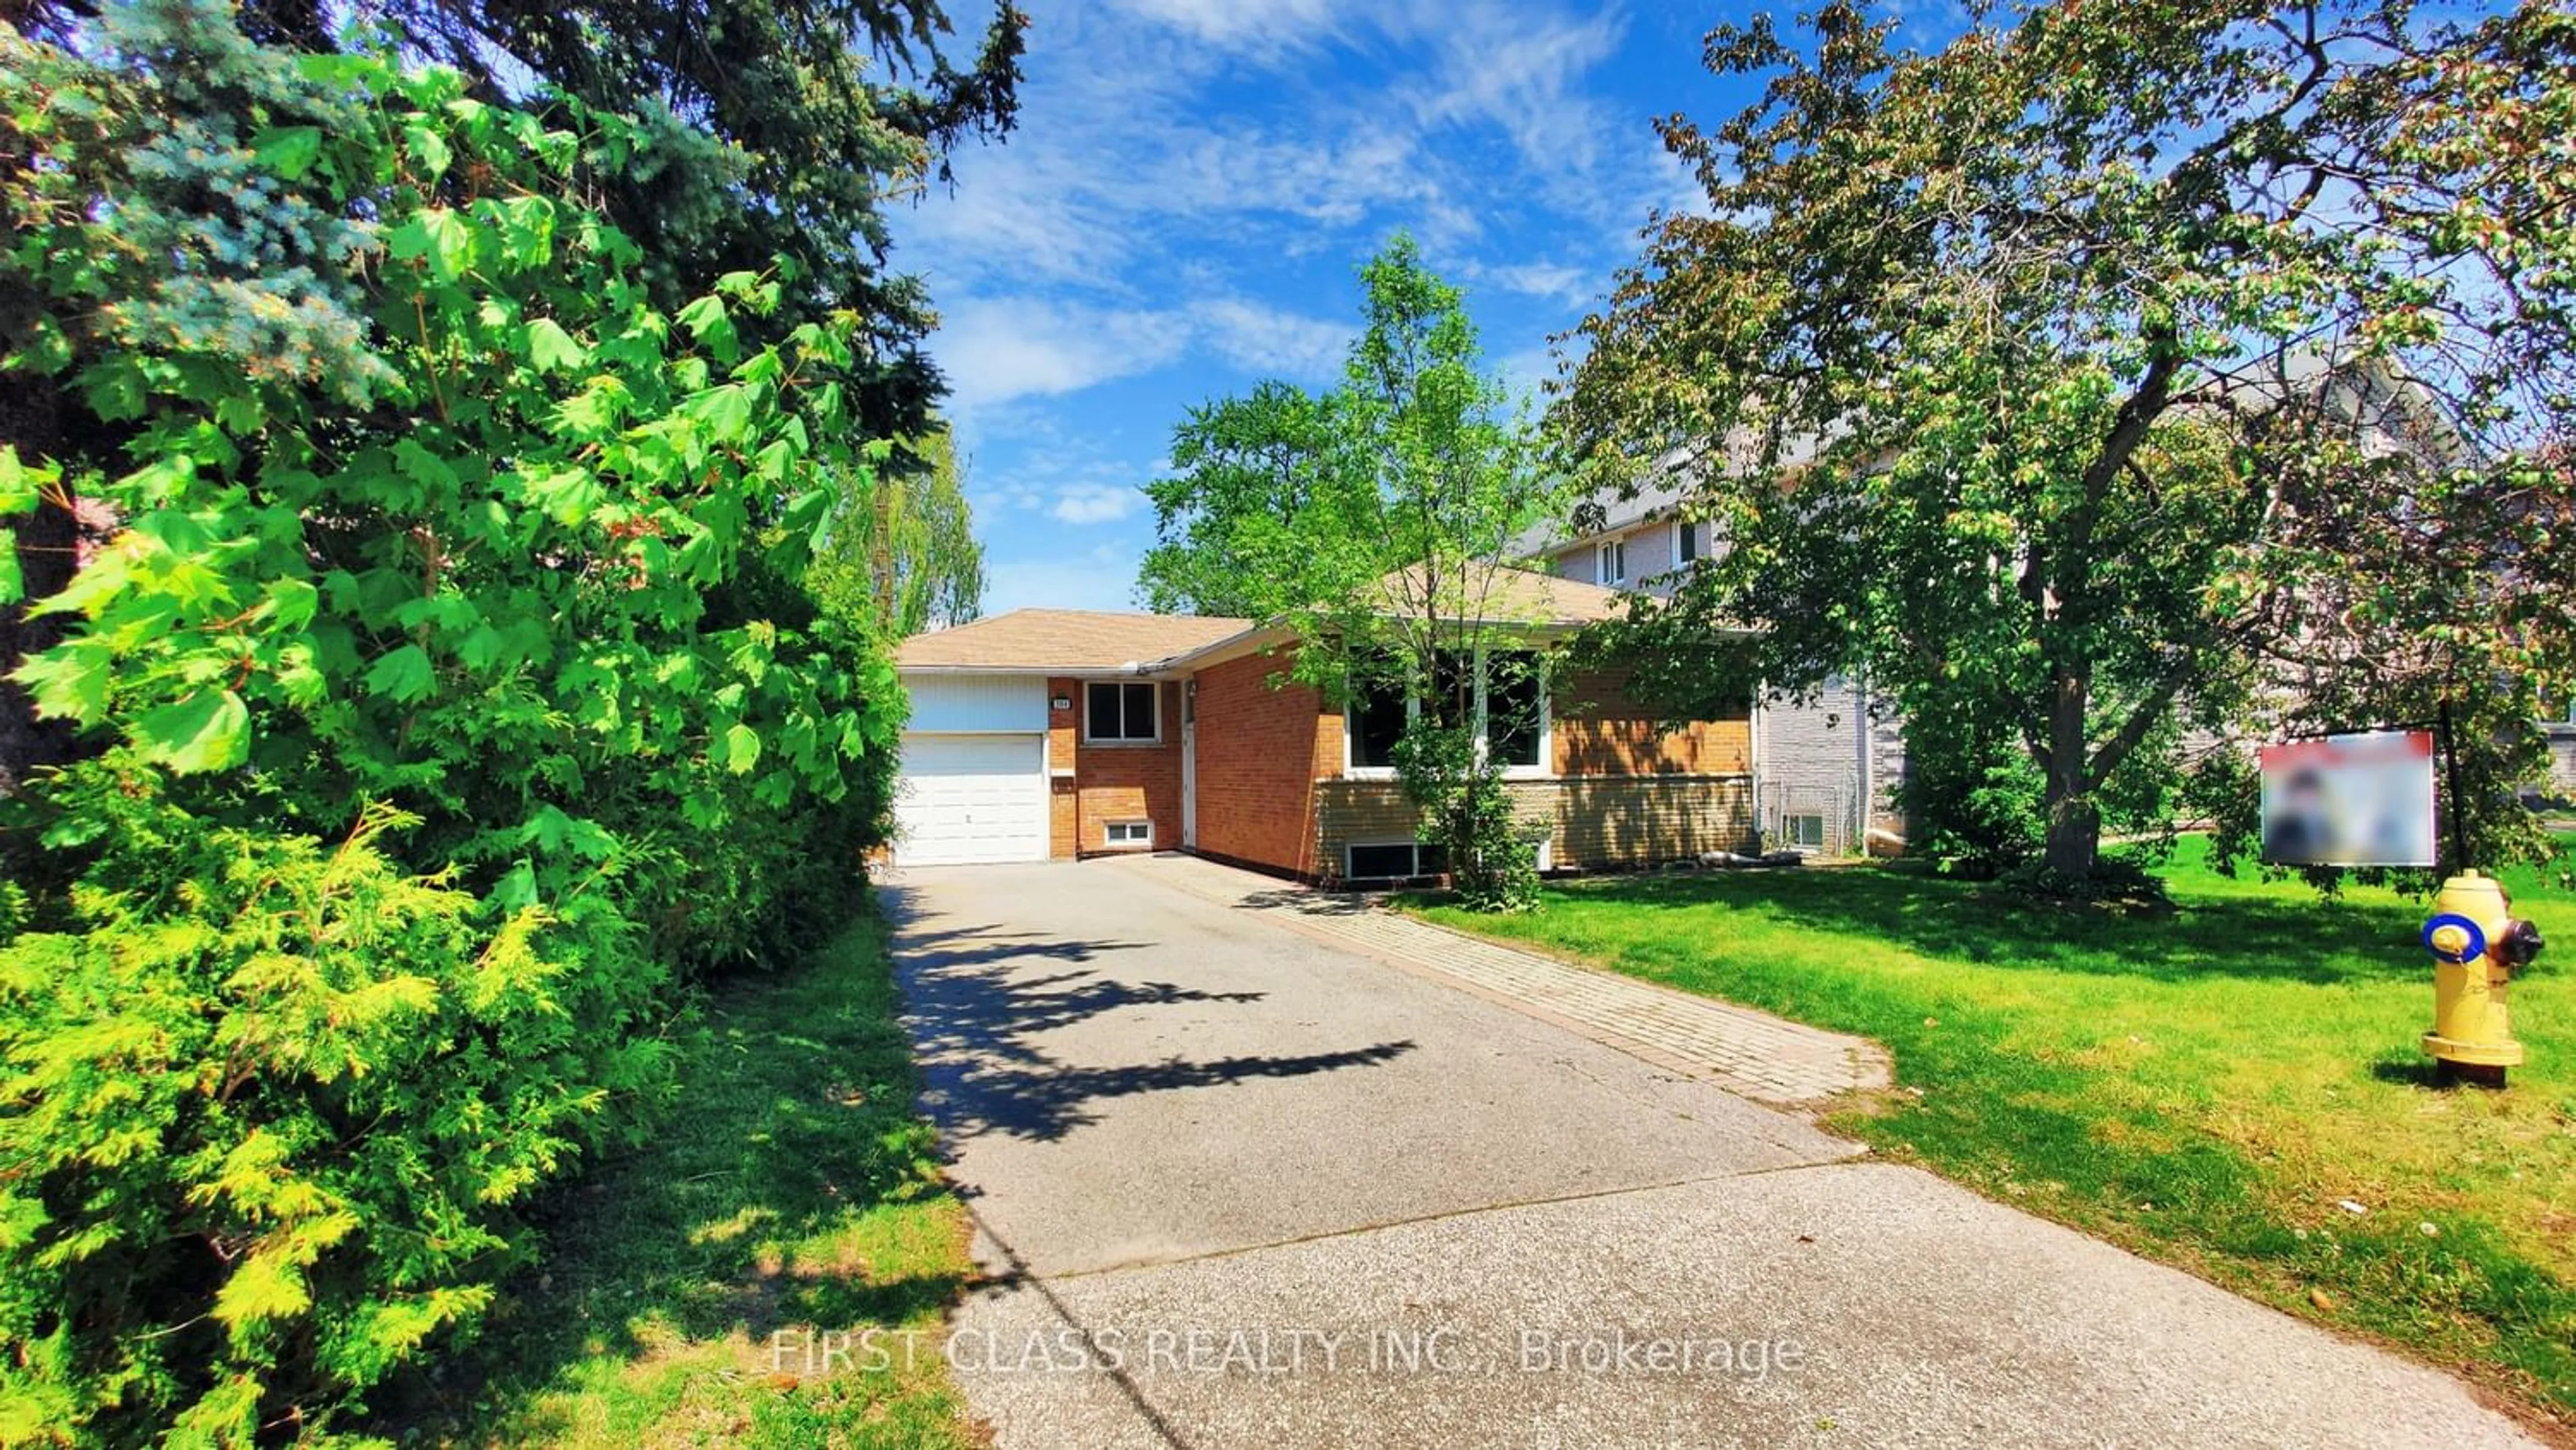 Frontside or backside of a home for 204 Pemberton Ave, Toronto Ontario M2M 1Y8